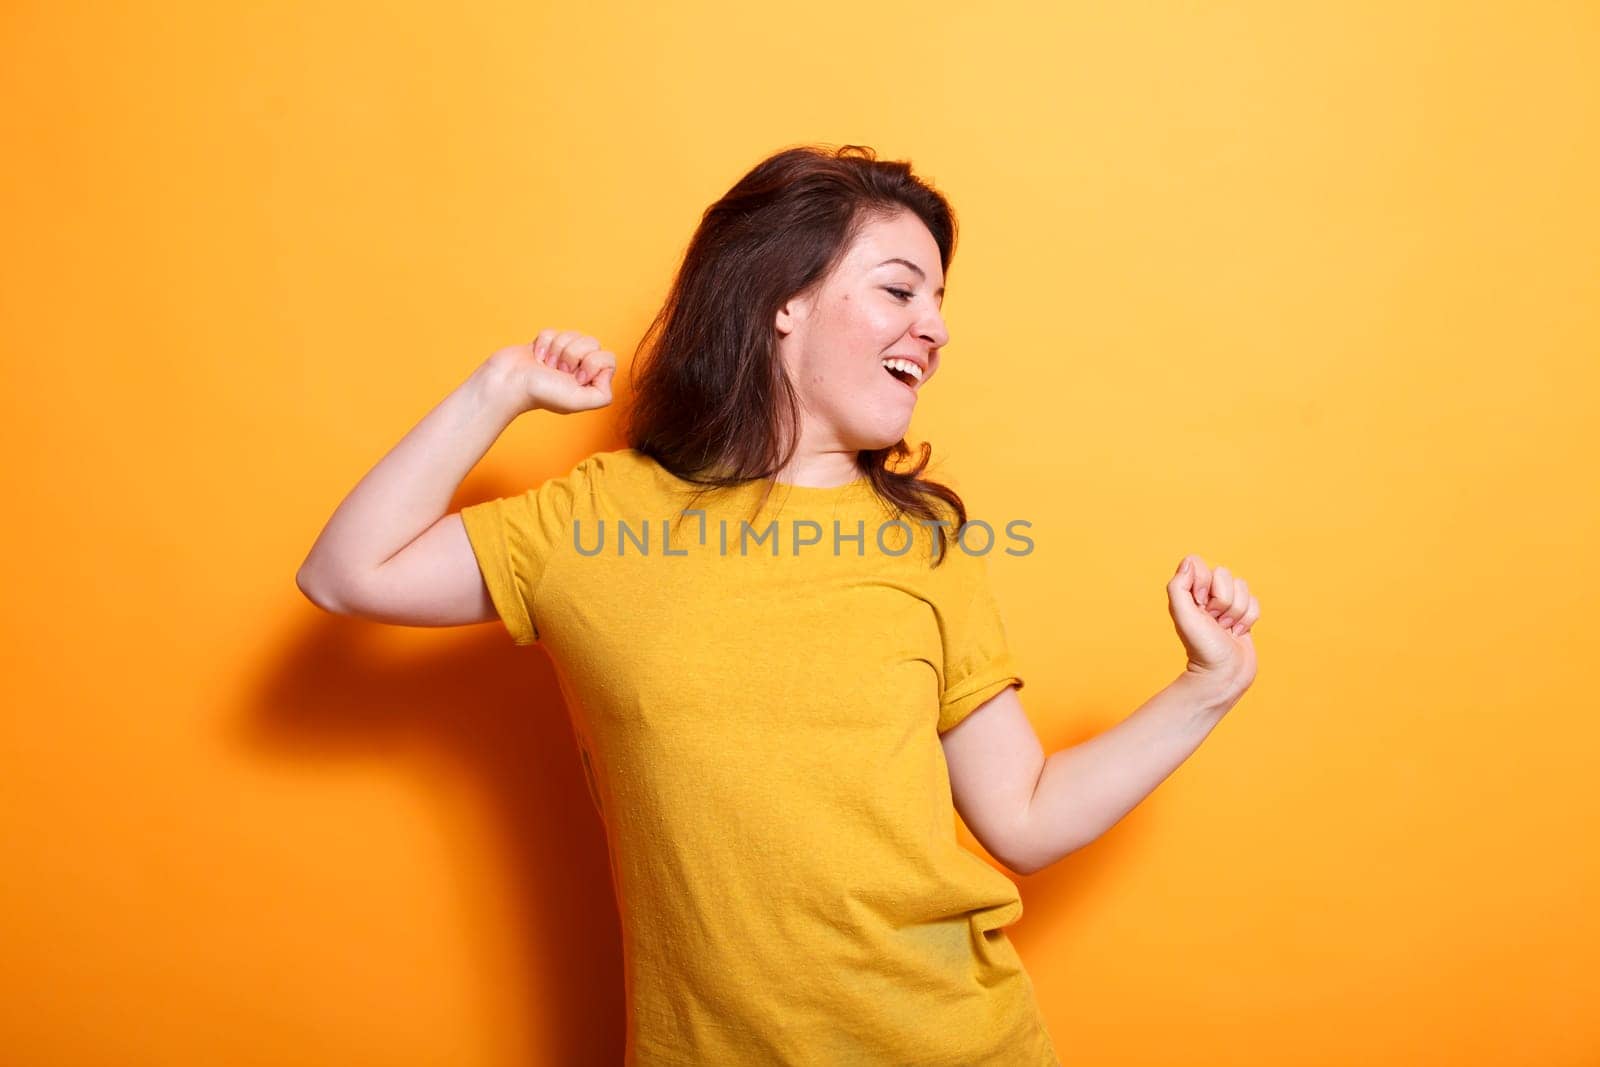 Cheerful woman happily dancing with hands in the air in front of isolated background. Caucasian lady radiating positivity, showcasing dance skills, and enjoying herself during casual photo shoot.